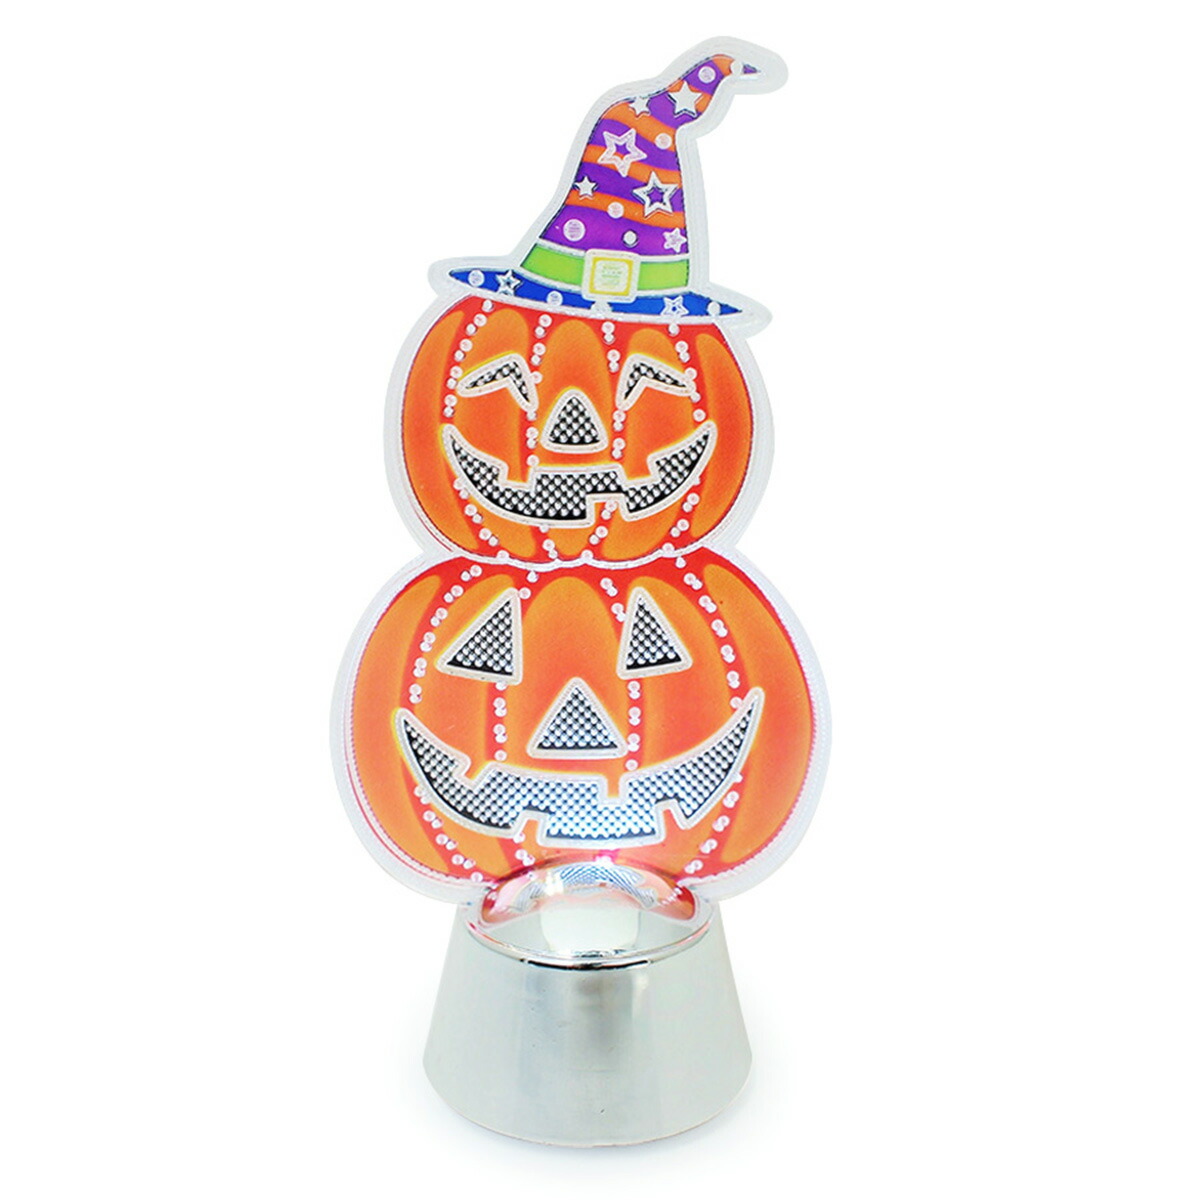 Interior Miscellaneous Goods Ornament Party Ornament Accessories Decoration Accessory October 31 For The Gts Flushing Light Htn105 Pumpkin Halloween